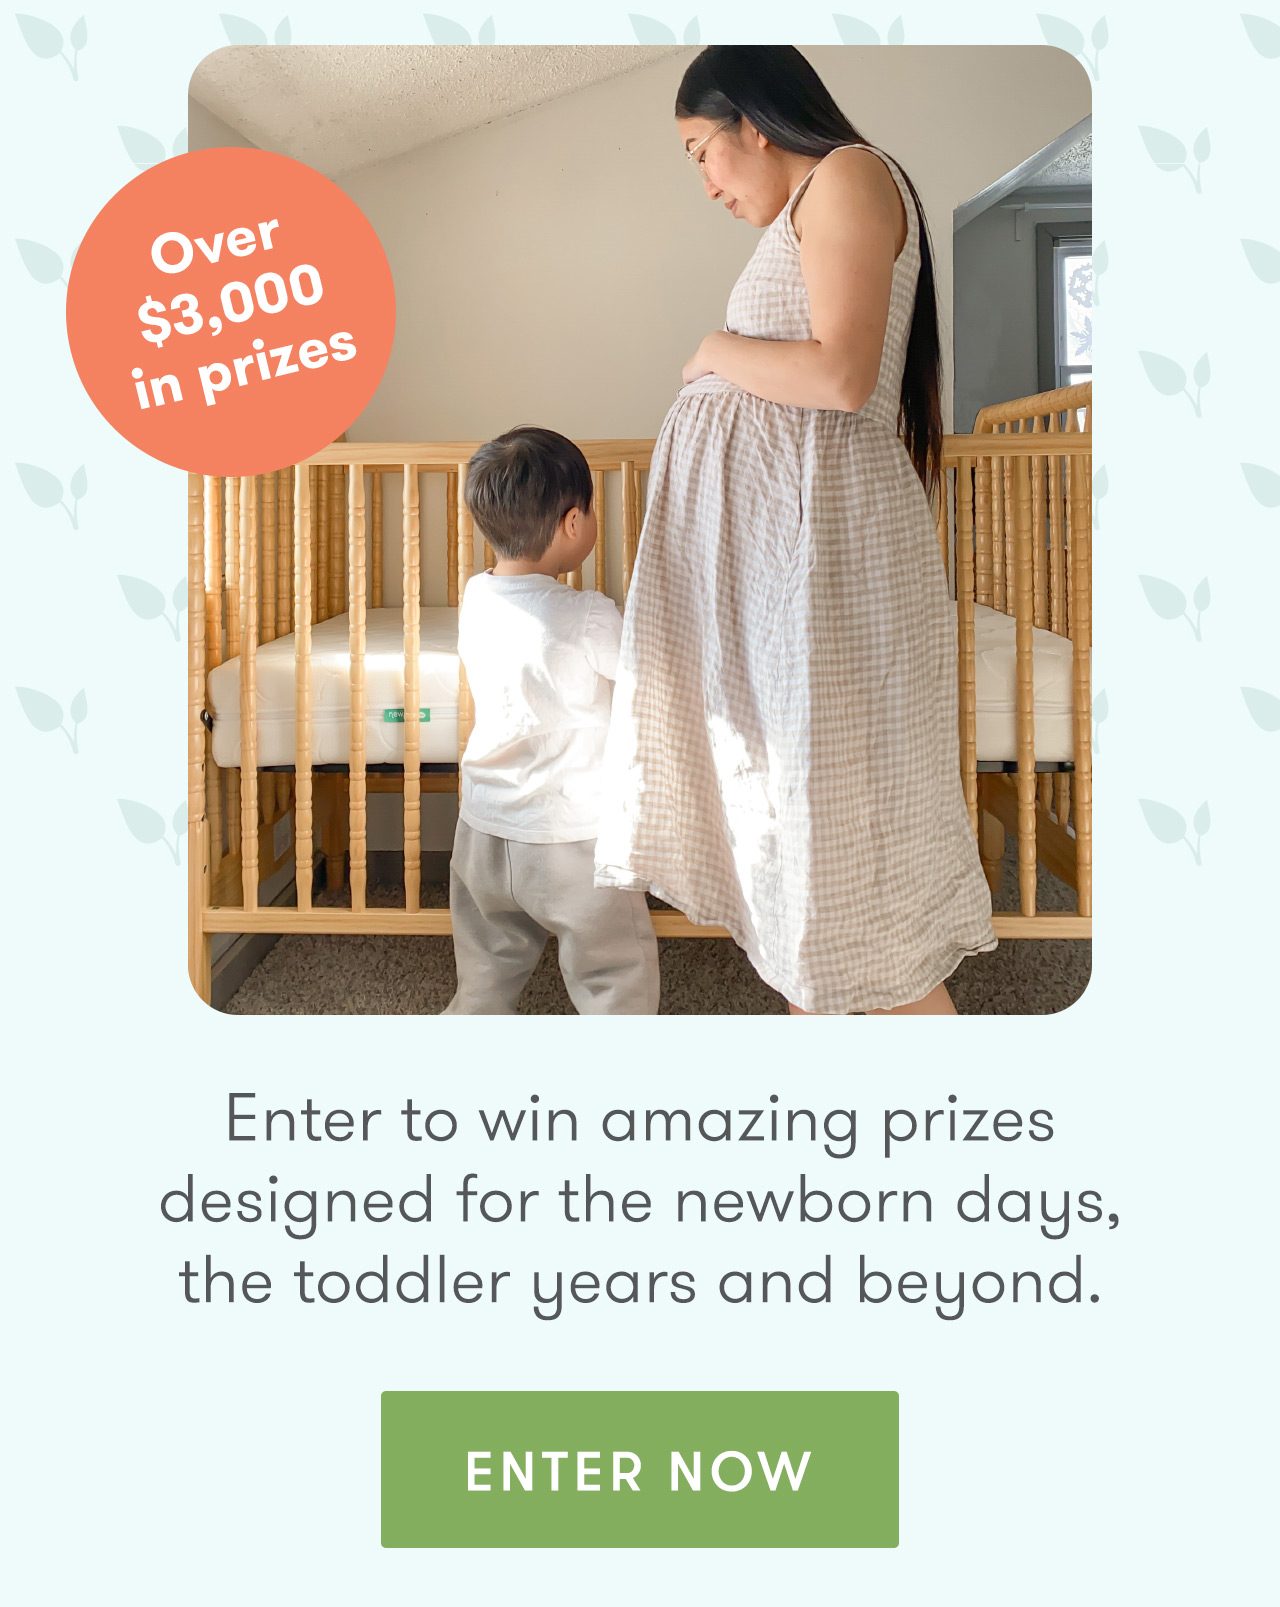  Enter to win amazing prizes designed for the newborn days, the toddler years and beyond. ENTER NOW 